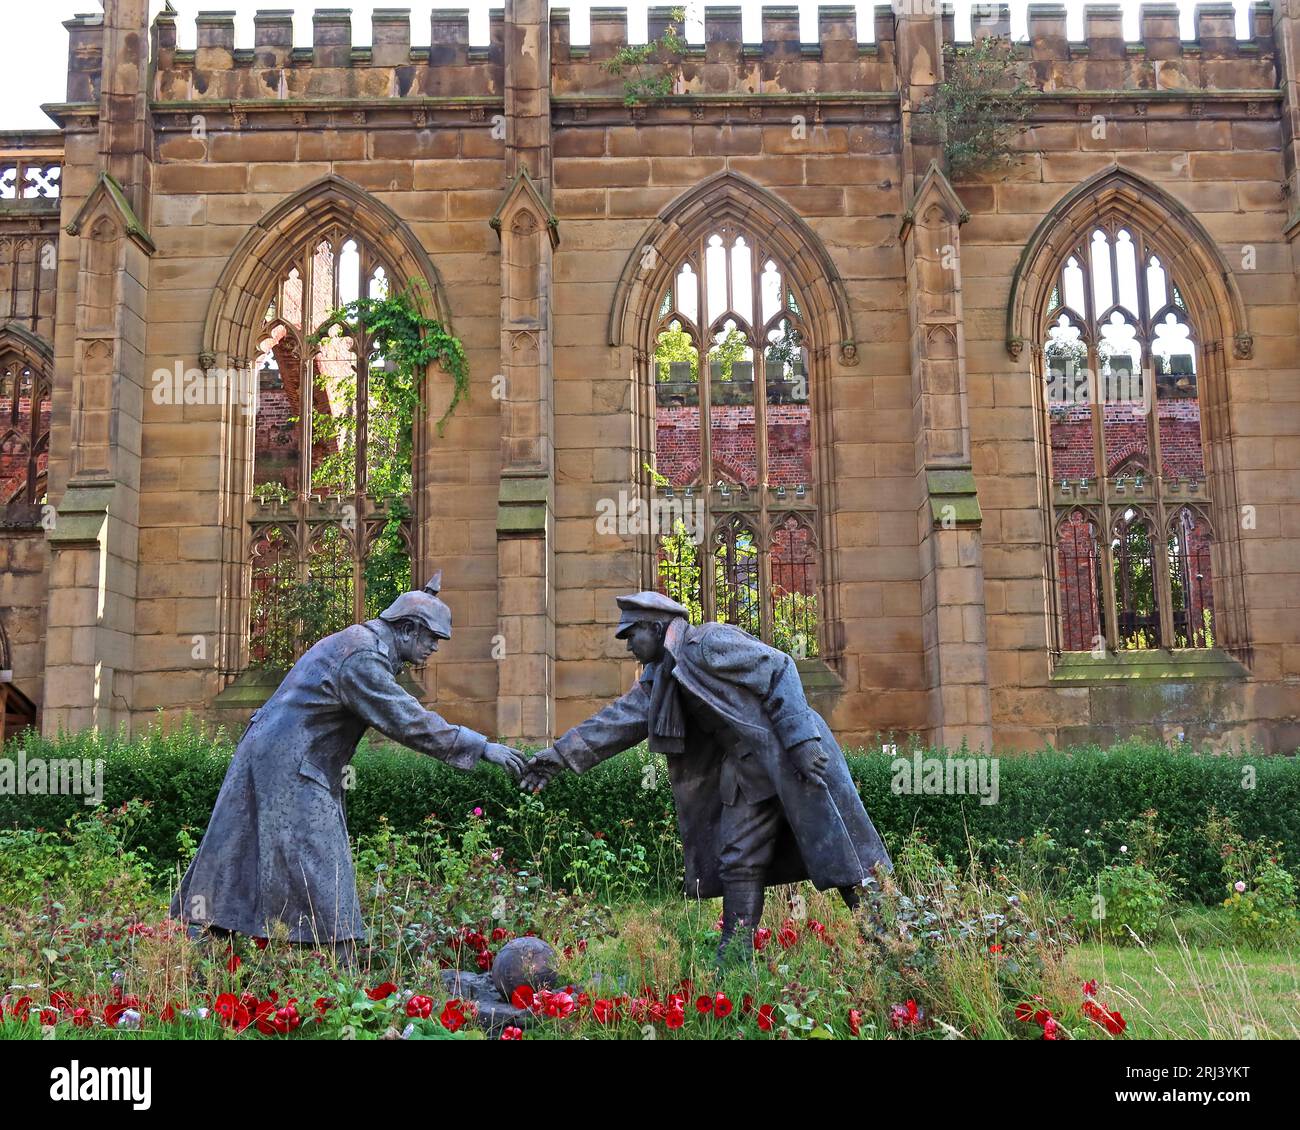 Die Skulptur „All Together Now“ von Andy Edwards in St. Lukes, The Bombed Out Church, Reece St, Liverpool, L1 2TR Stockfoto